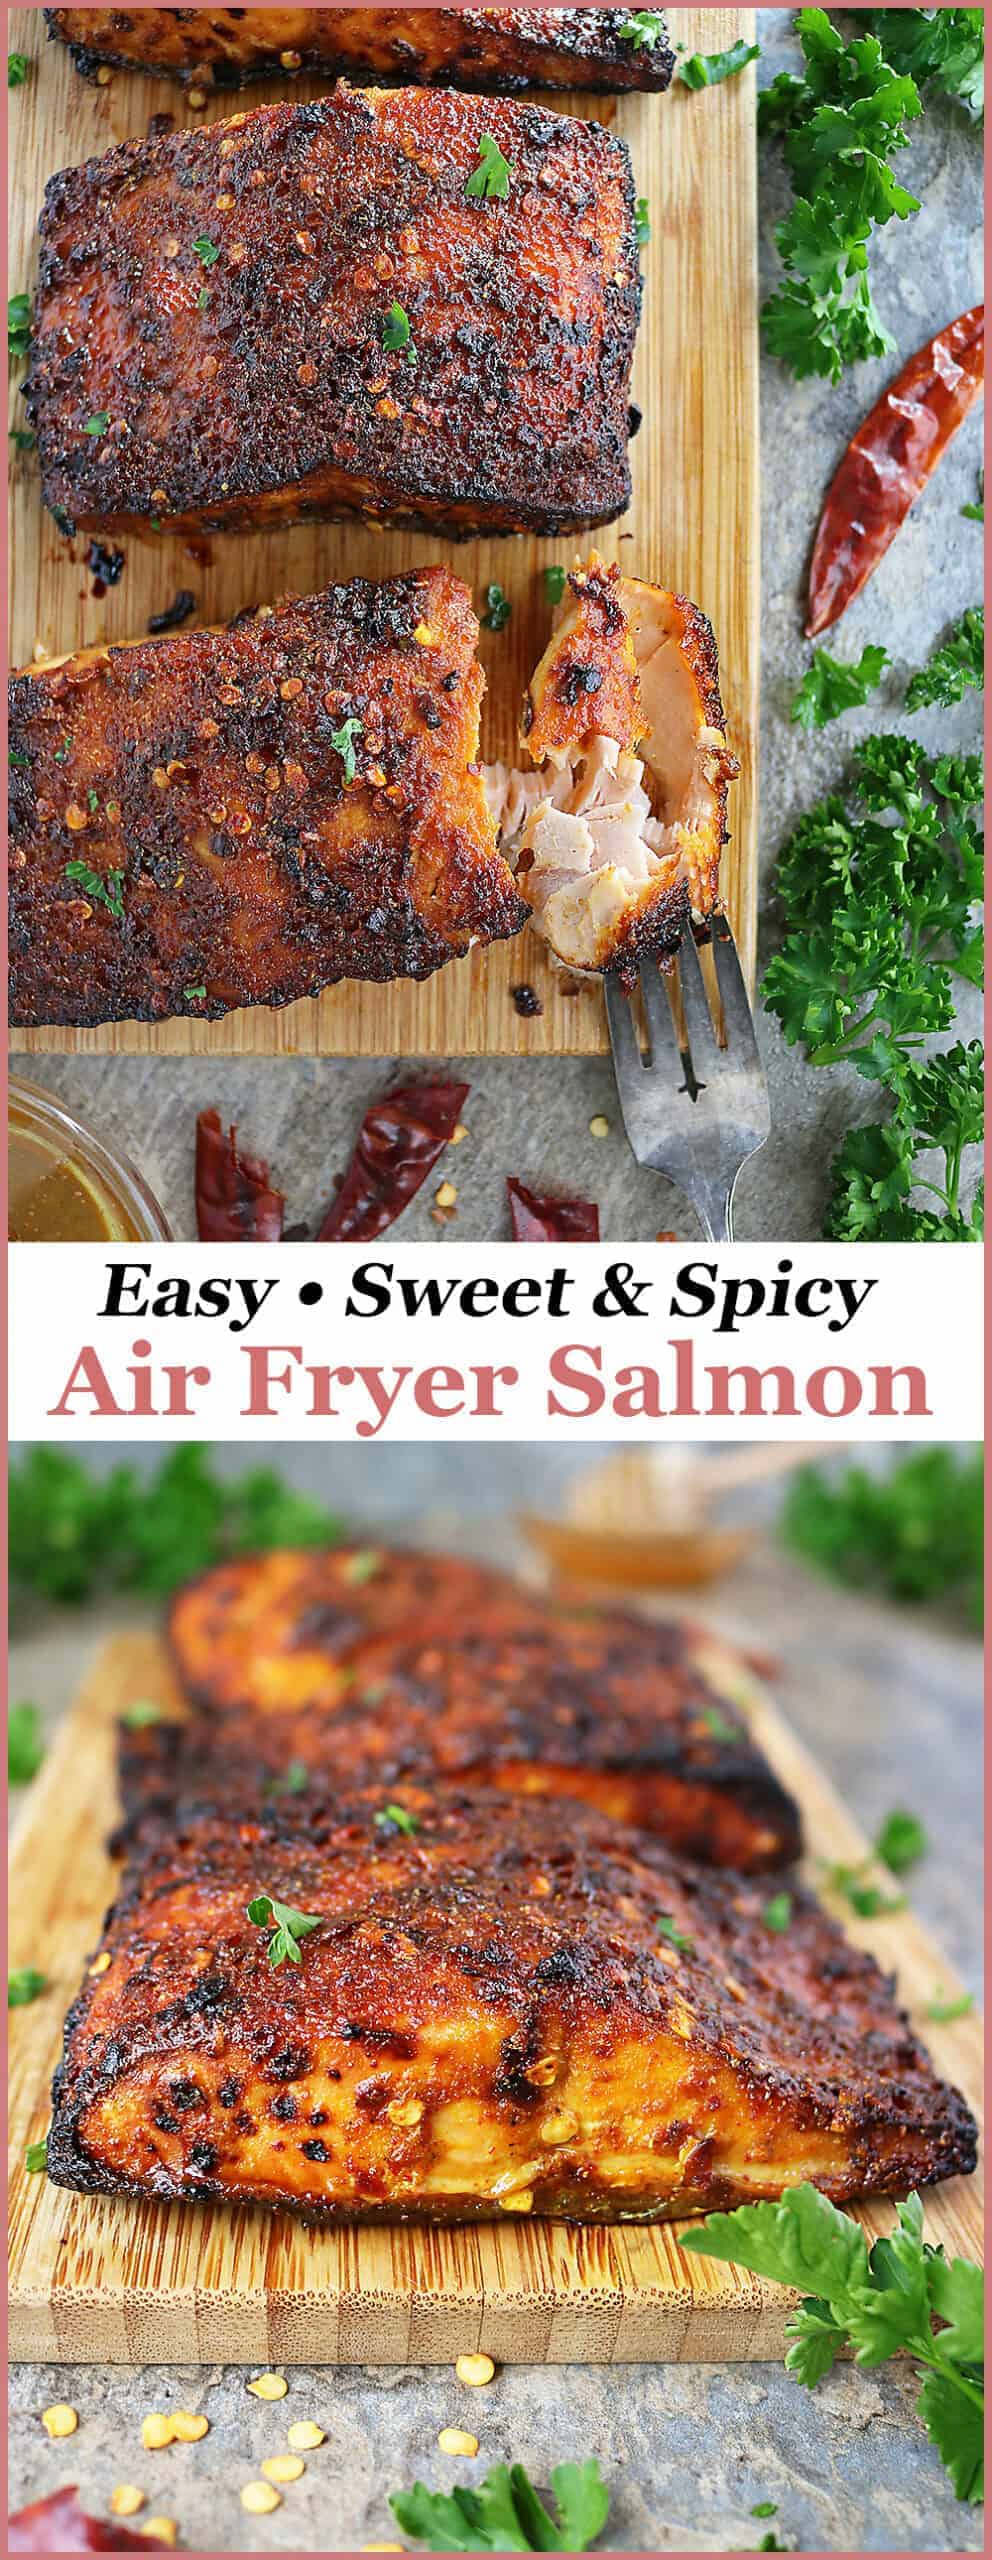 Easy Sweet Spicy Air Fryer Salmon Recipe - Savory Spin -   17 air fryer recipes healthy low sodium ideas